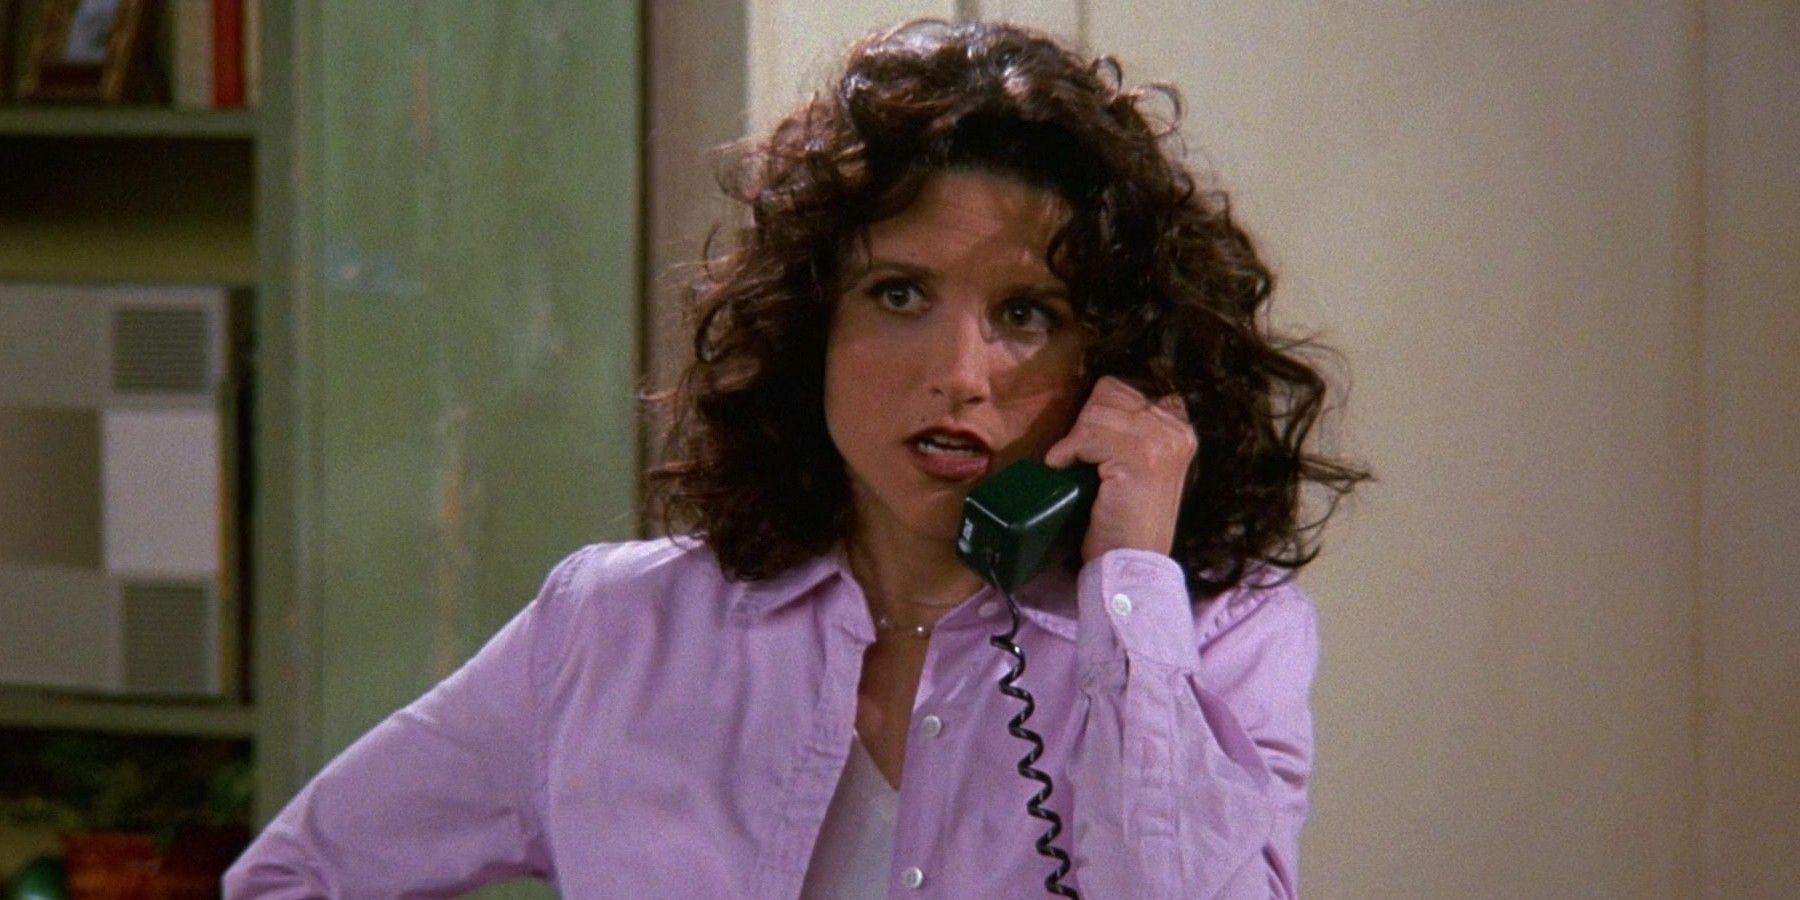 Elaine talking on the phone in Seinfeld